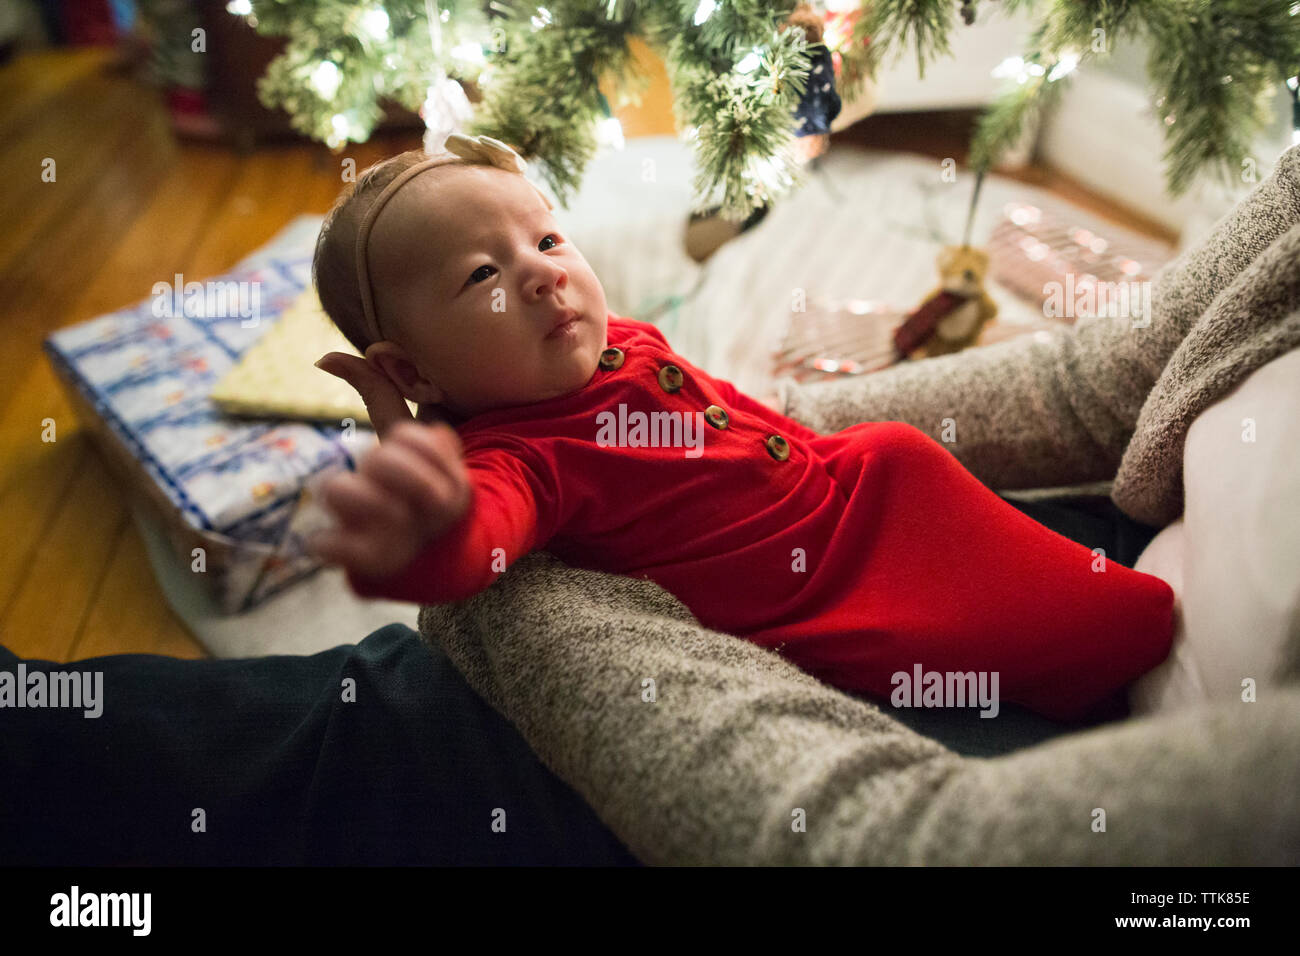 Baby girl wearing bow and red looks up at mom next to Christmas tree Stock Photo